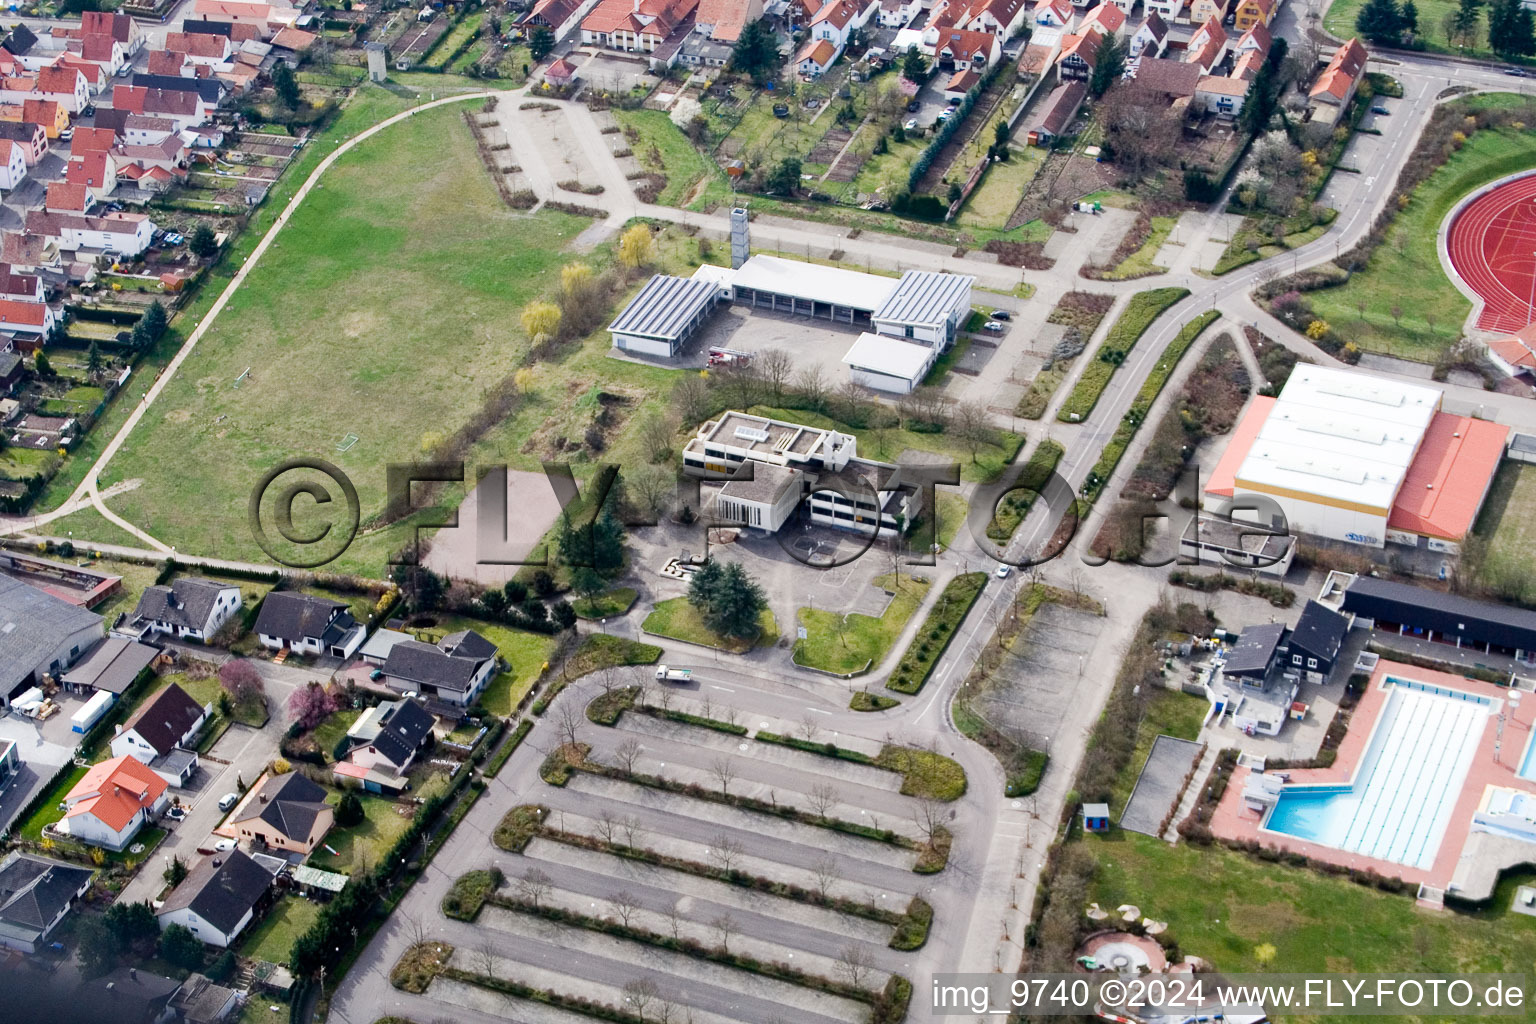 Association of Town Hall in Offenbach an der Queich in the state Rhineland-Palatinate, Germany from above